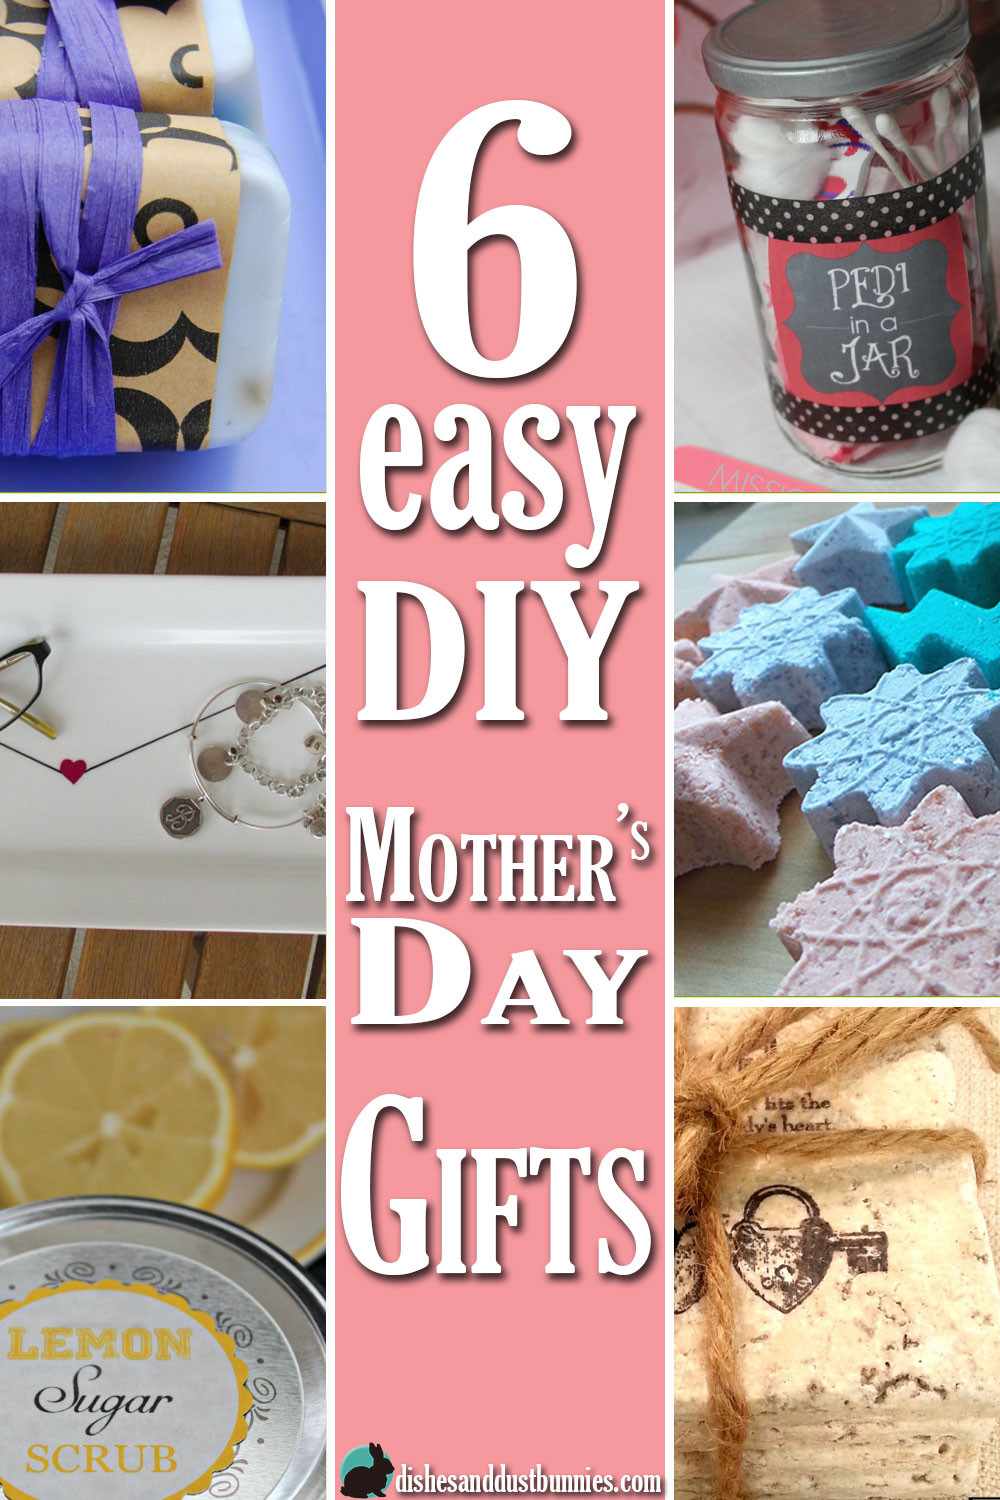 Inexpensive Mother'S Day Gift Ideas For Church
 6 Easy DIY Mother s Day Gifts Dishes and Dust Bunnies